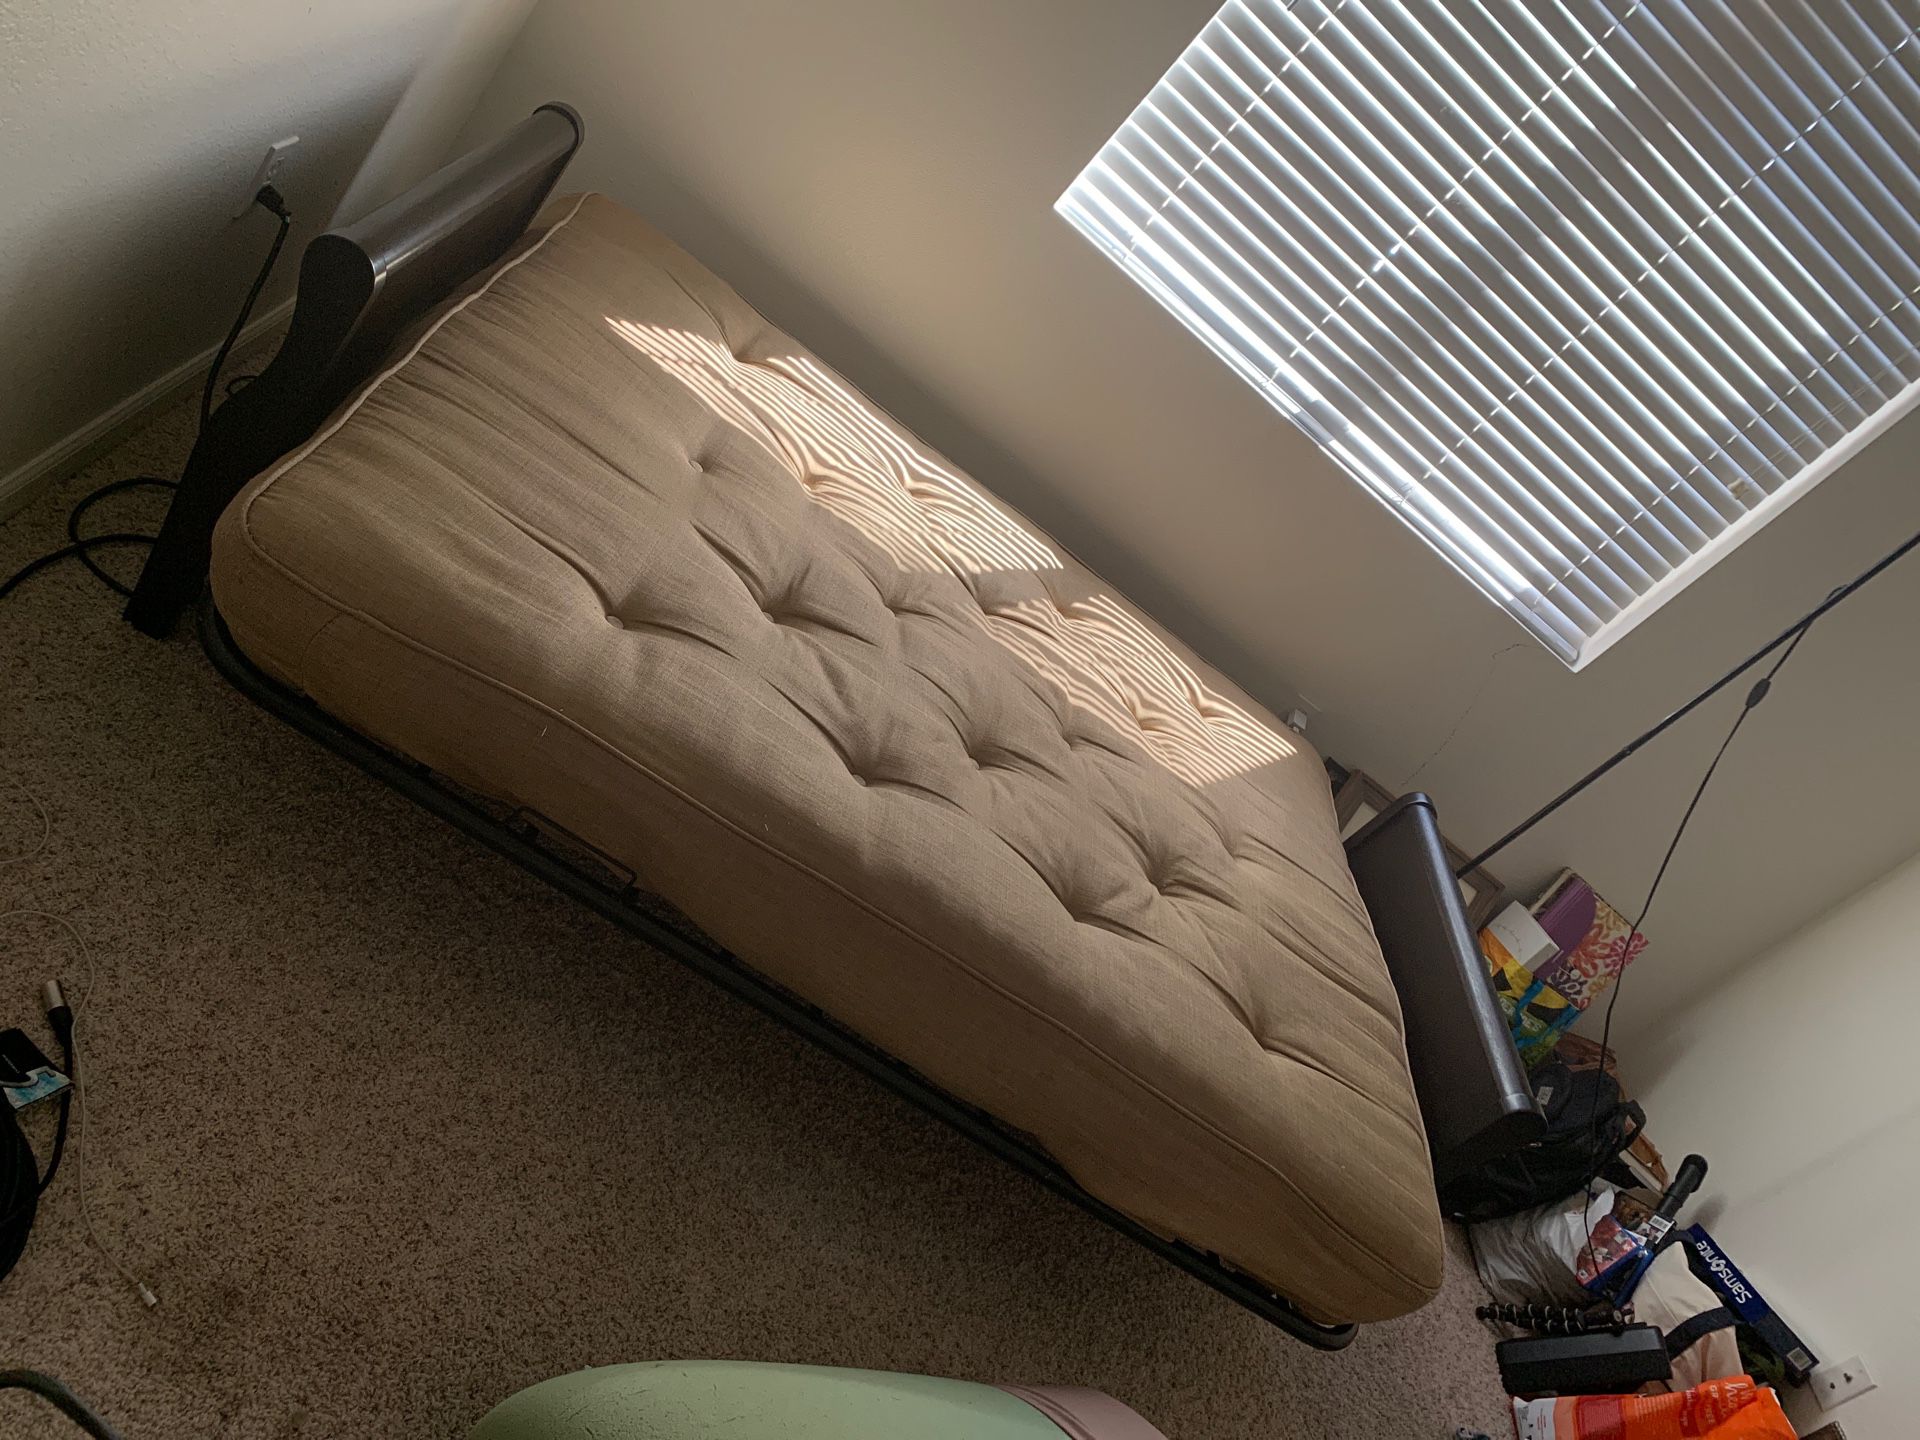 Futon couch/Queen size bed